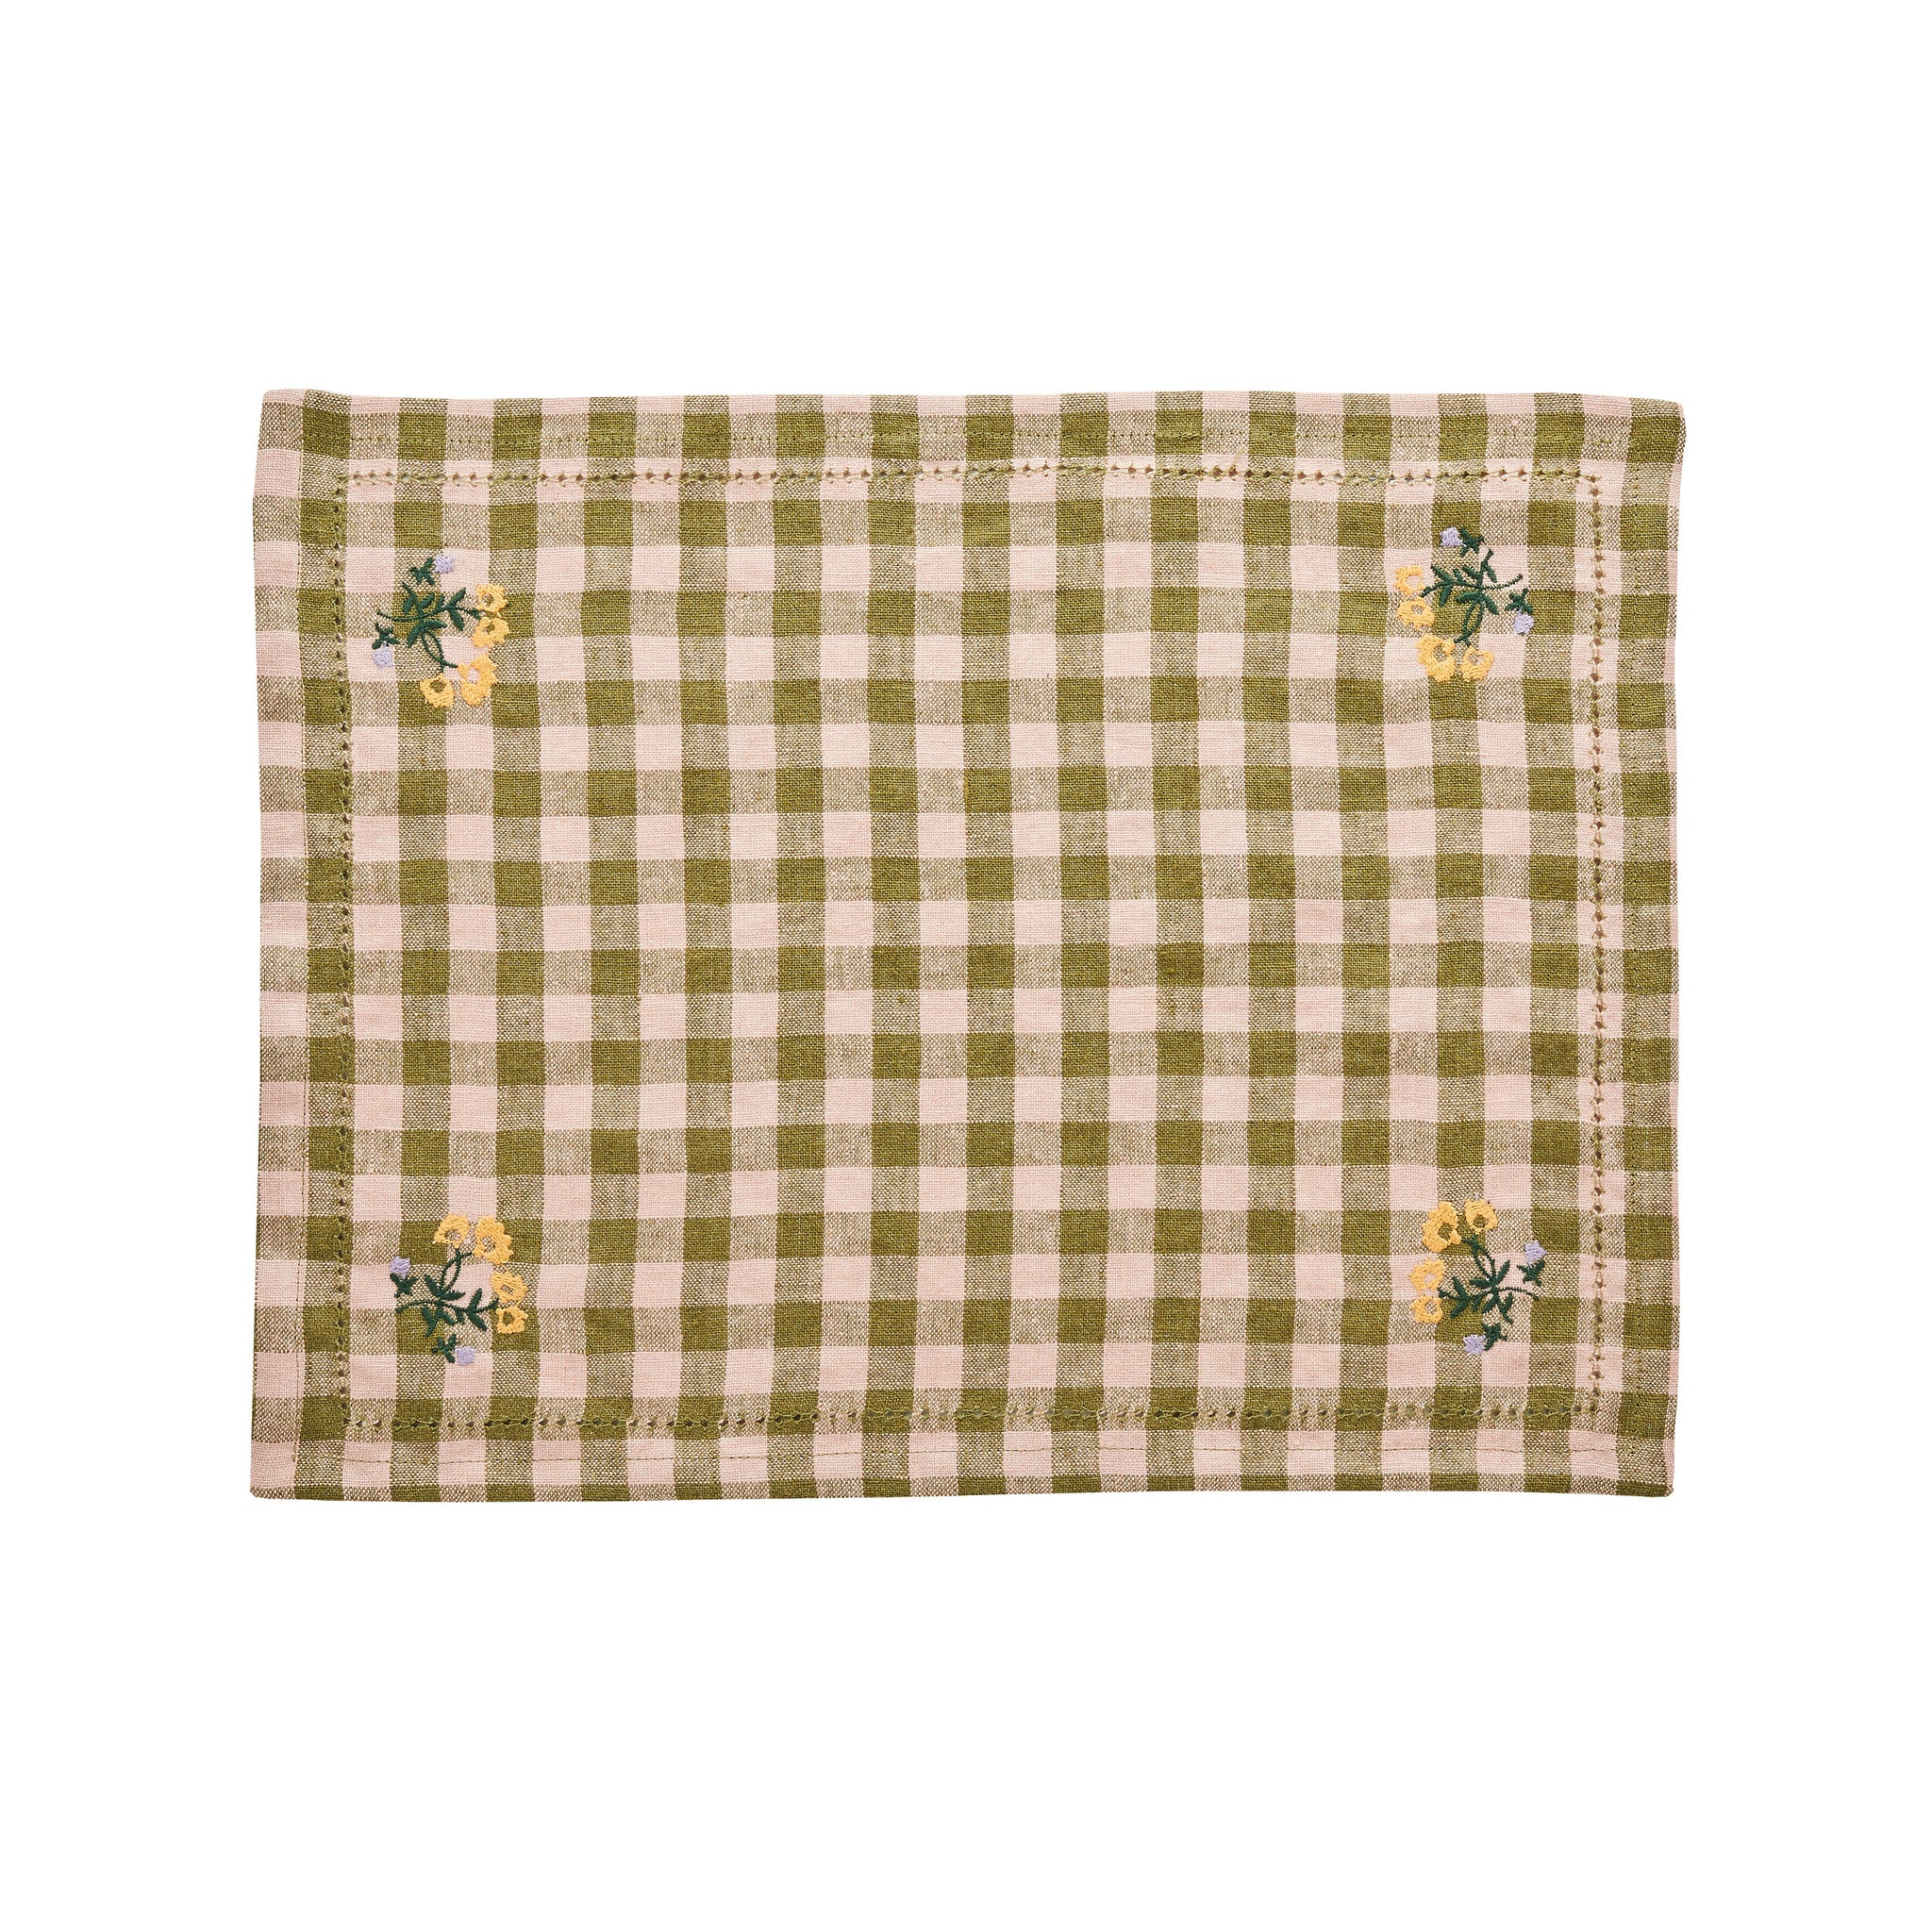 gingham embroidered napkin/placemat